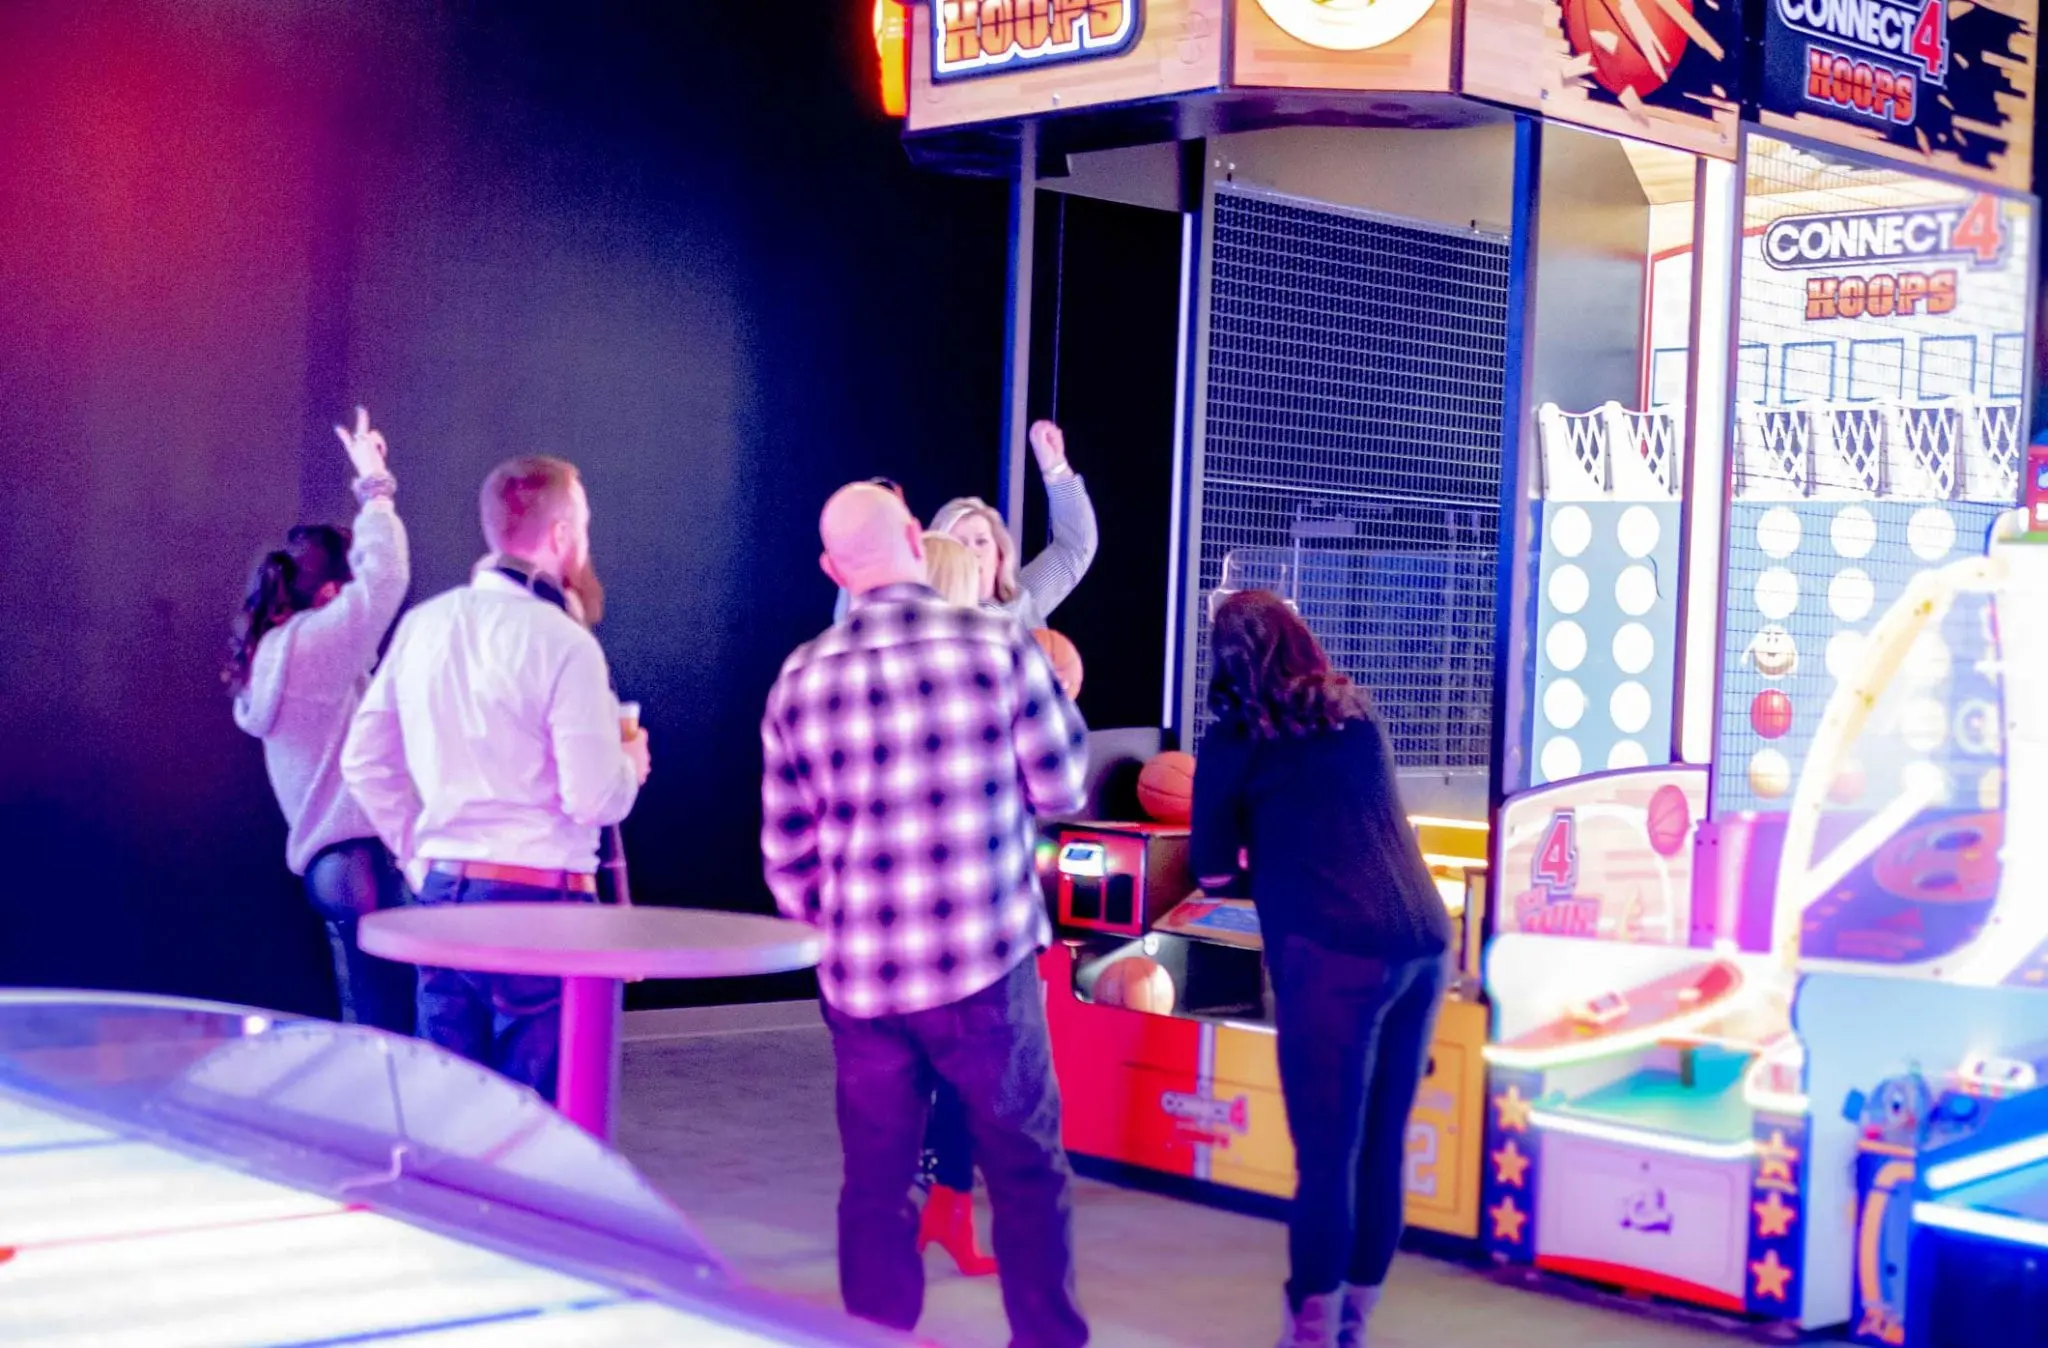 People playing basketball game in arcade